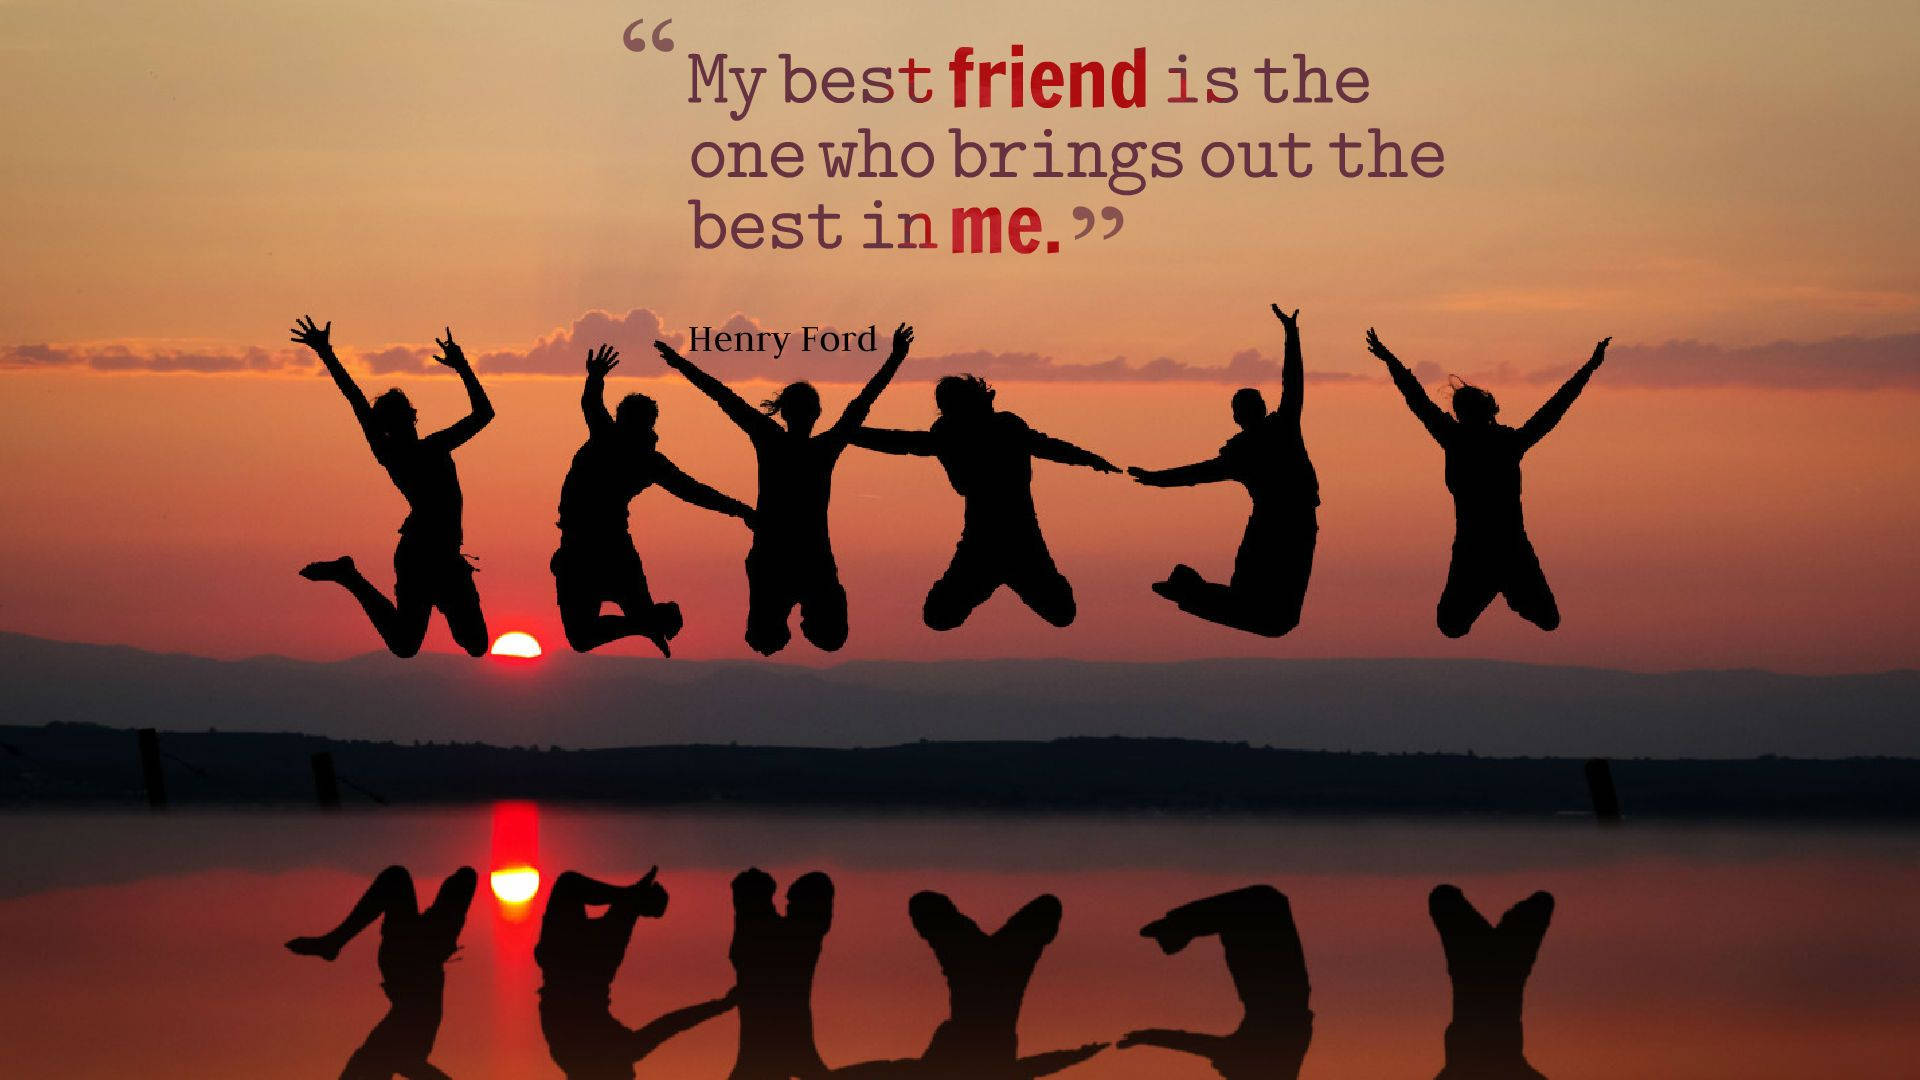 Free Friendship Quotes Wallpaper Downloads, Friendship Quotes Wallpaper for FREE